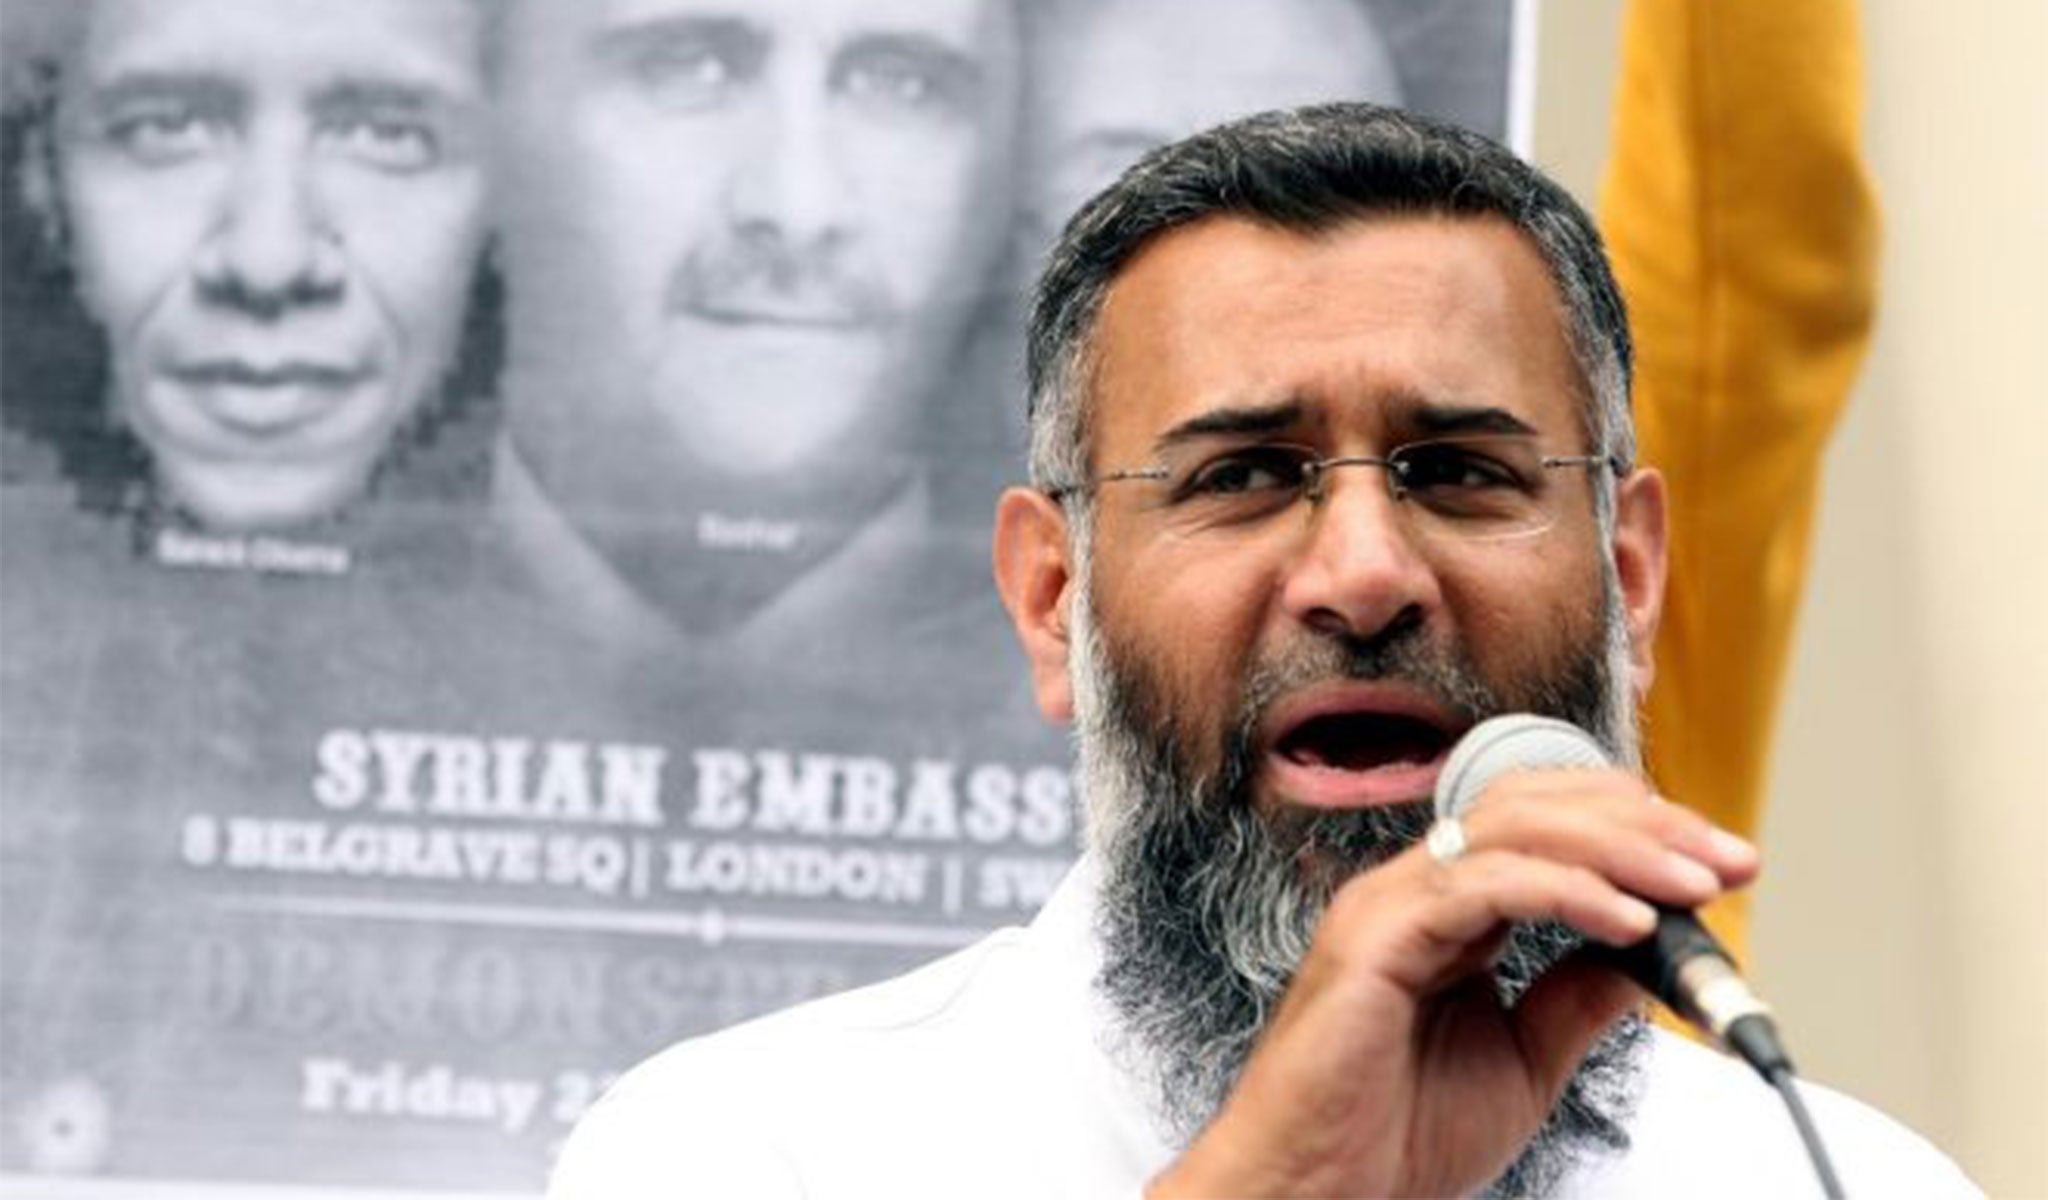 Nine men, including radical preacher Anjem Choudary, were arrested yesterday as part of an investigation into Islamist terrorism on Thursday